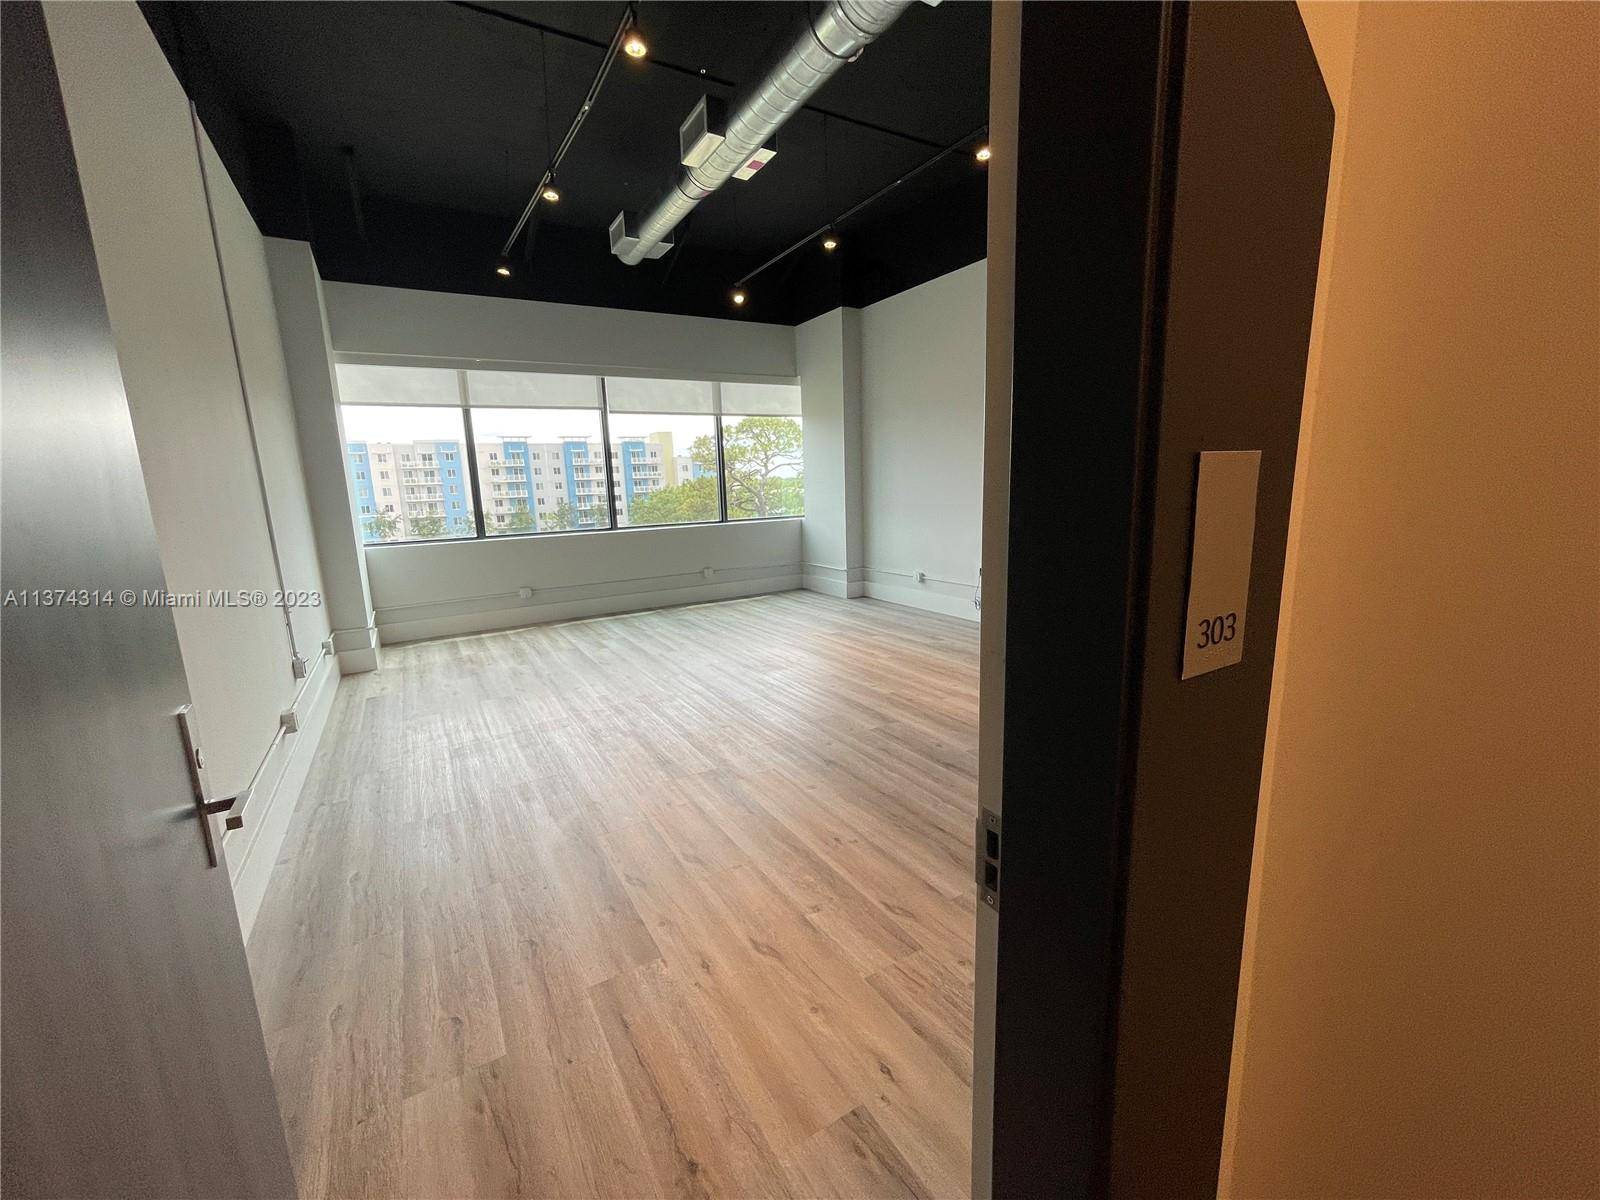 Brand new office at Forum Aventura Never occupied or rented Excellent location in front of the new train station at Aventura mall.